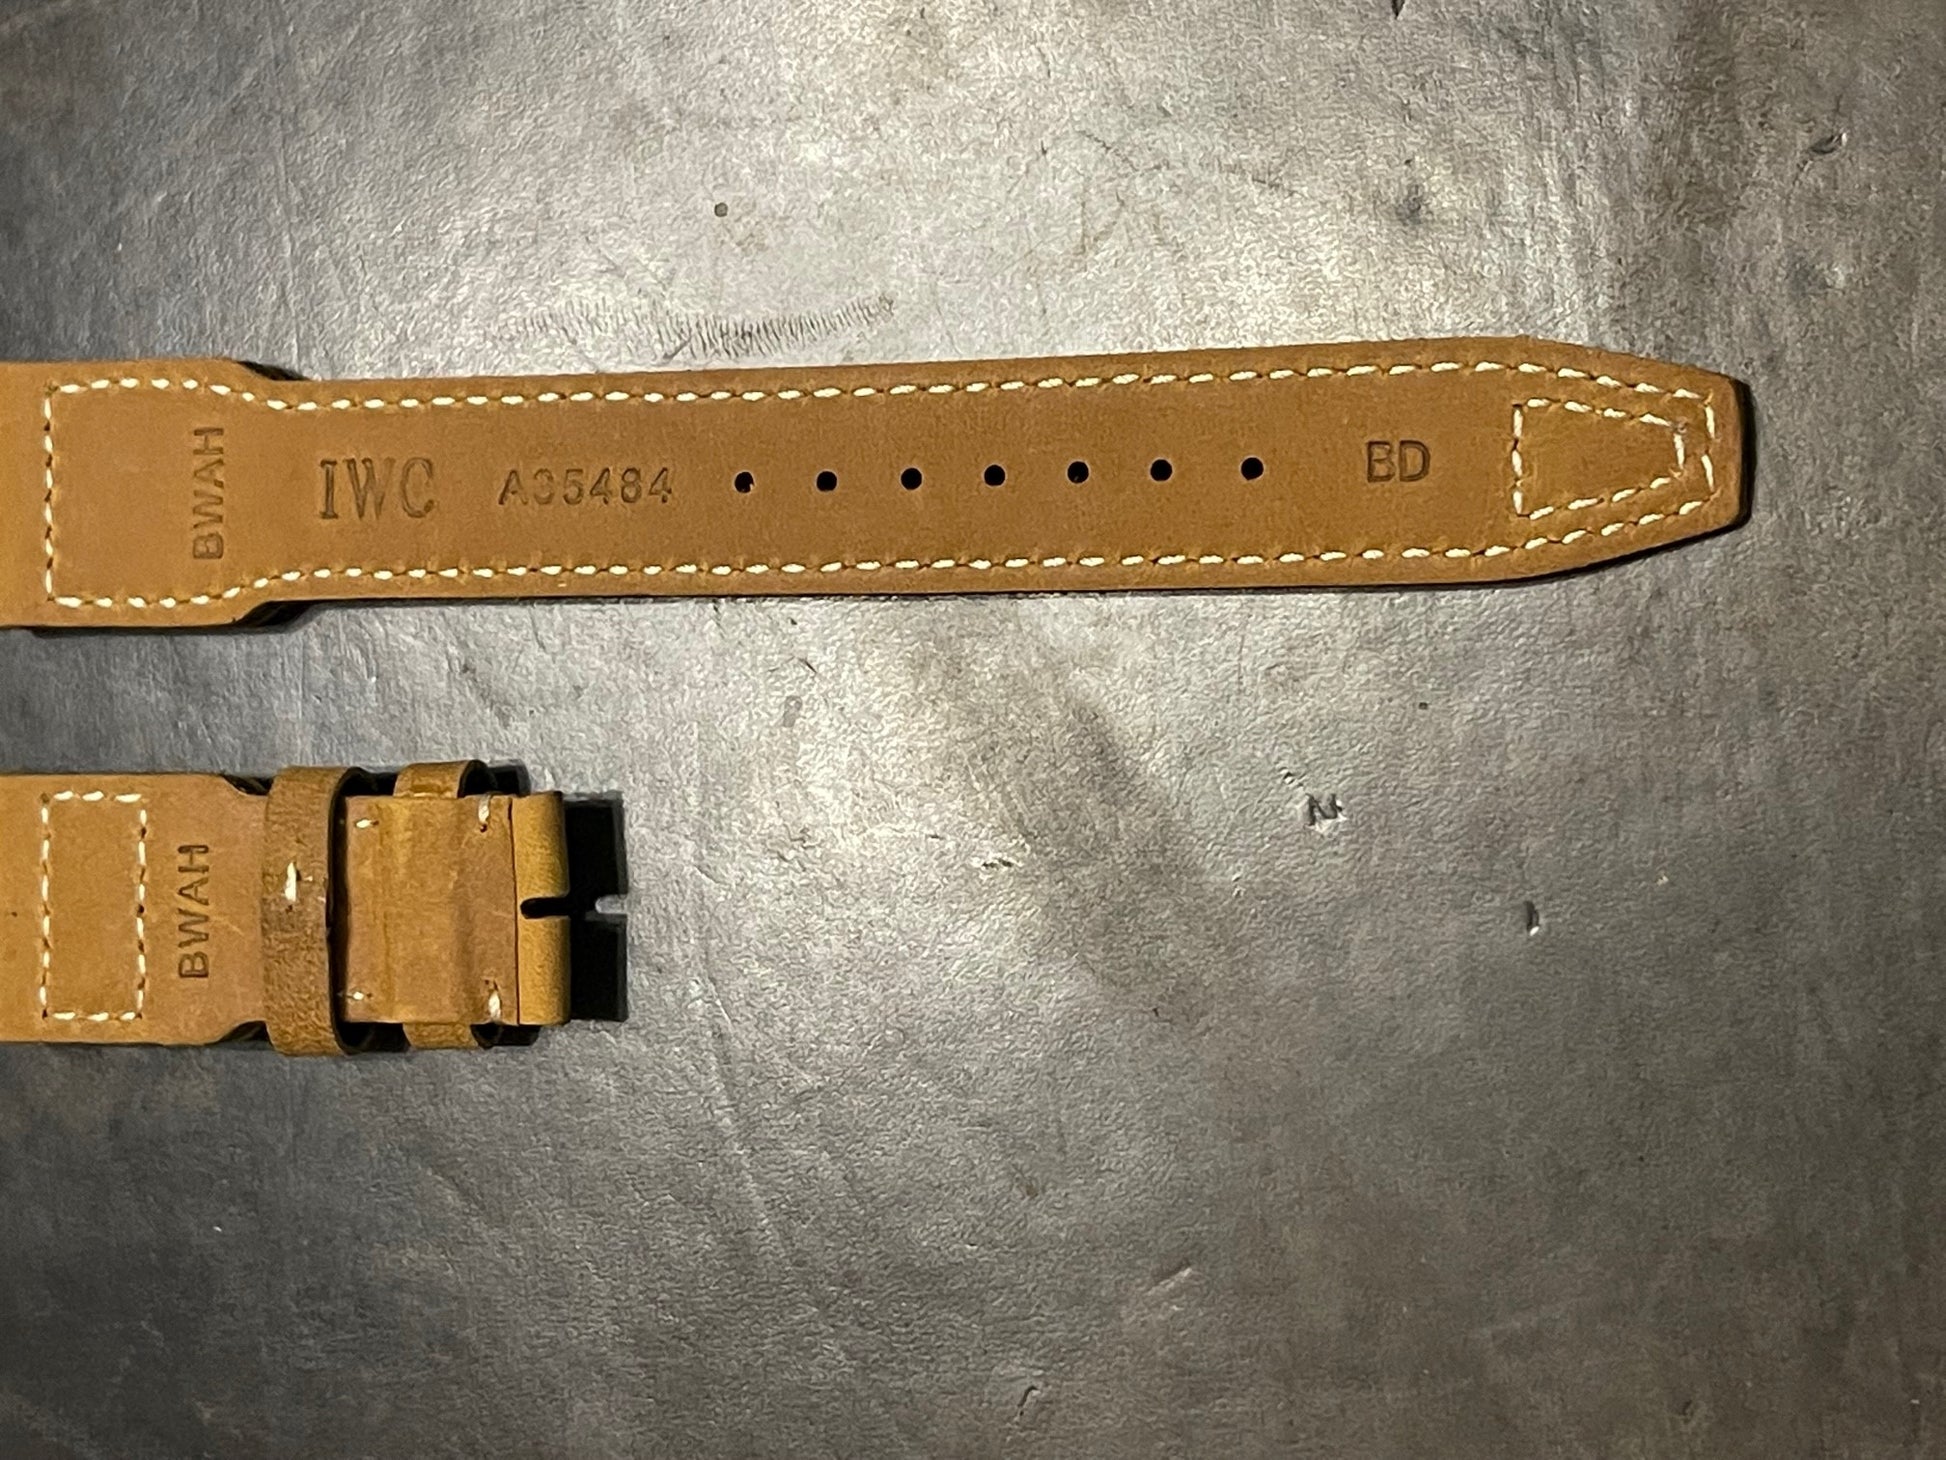 IWC Tan Suede Watch Strap For Deployant Clasp